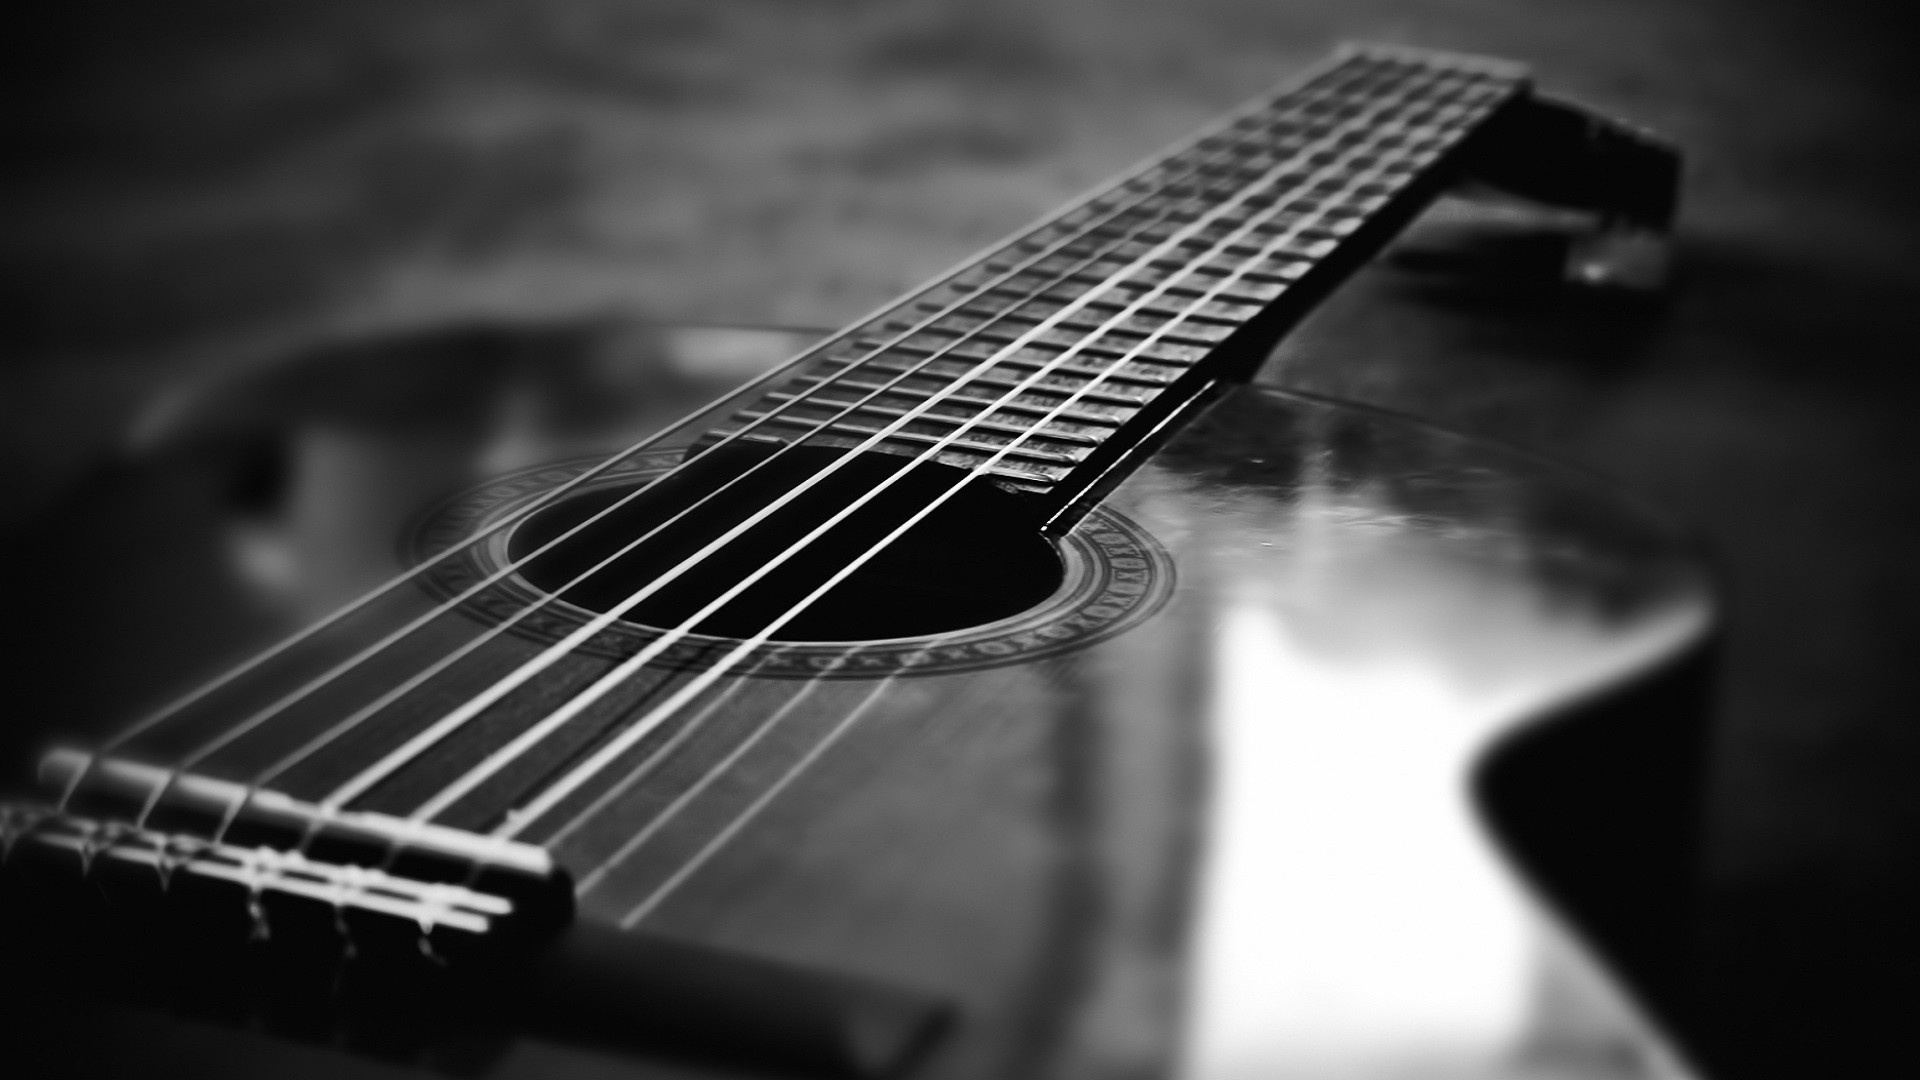 Guitar: Black and white, A musical instrument having a flat back and usually six strings. 1920x1080 Full HD Wallpaper.